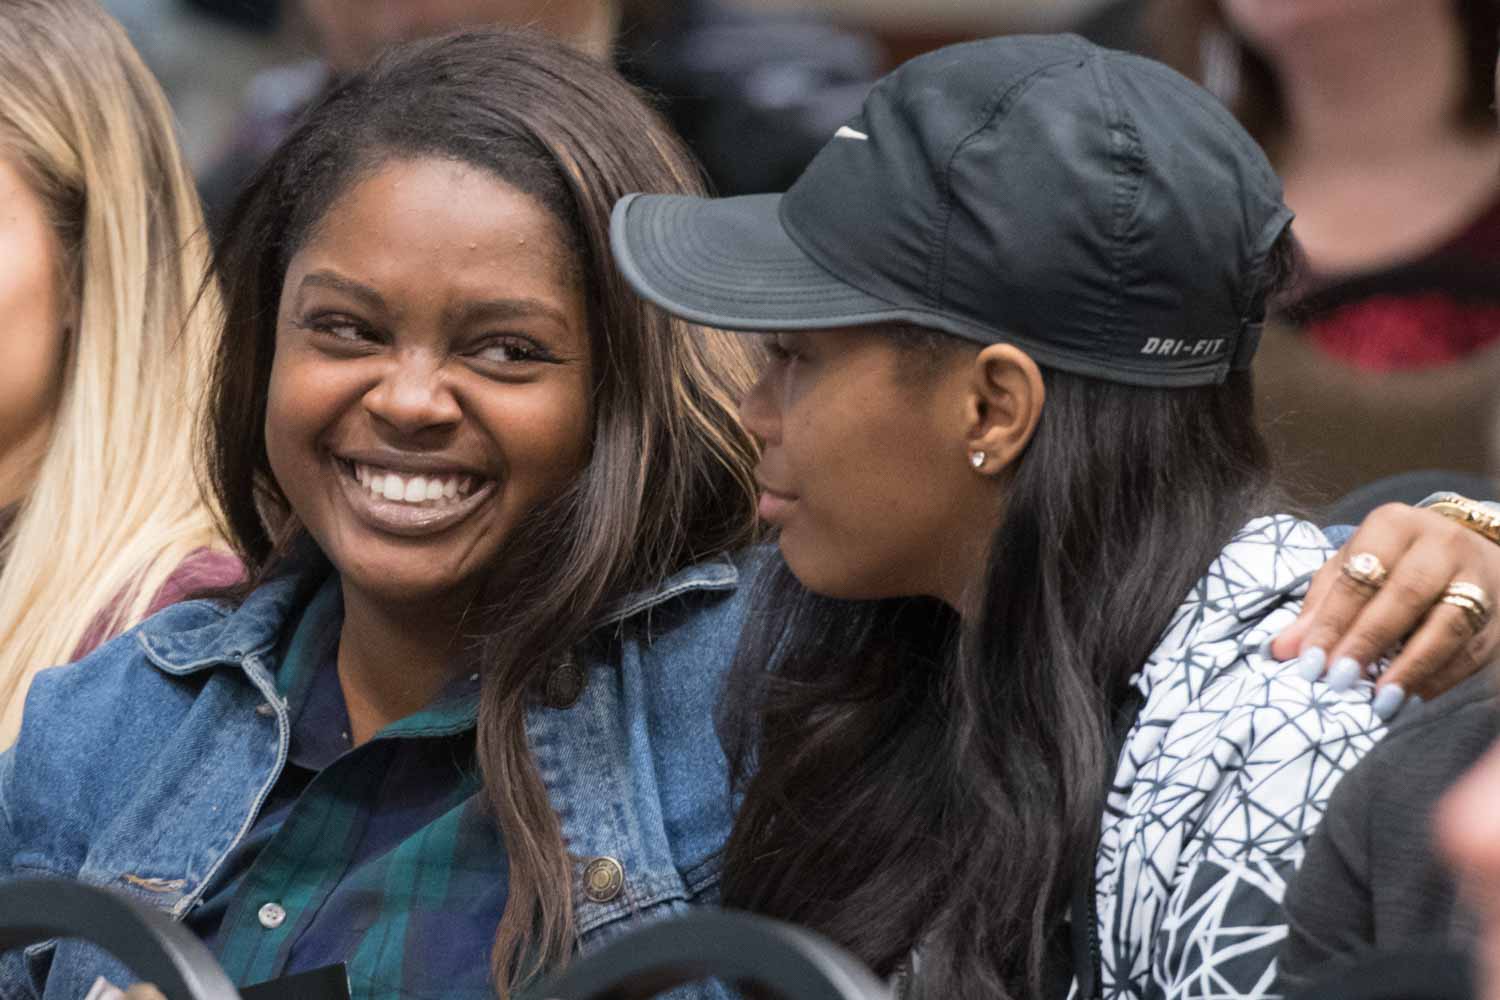 Robbie Hatchett, left, shares a smile with her friend, Raven Smith, who both attended the event in honor of Dariana Byone.